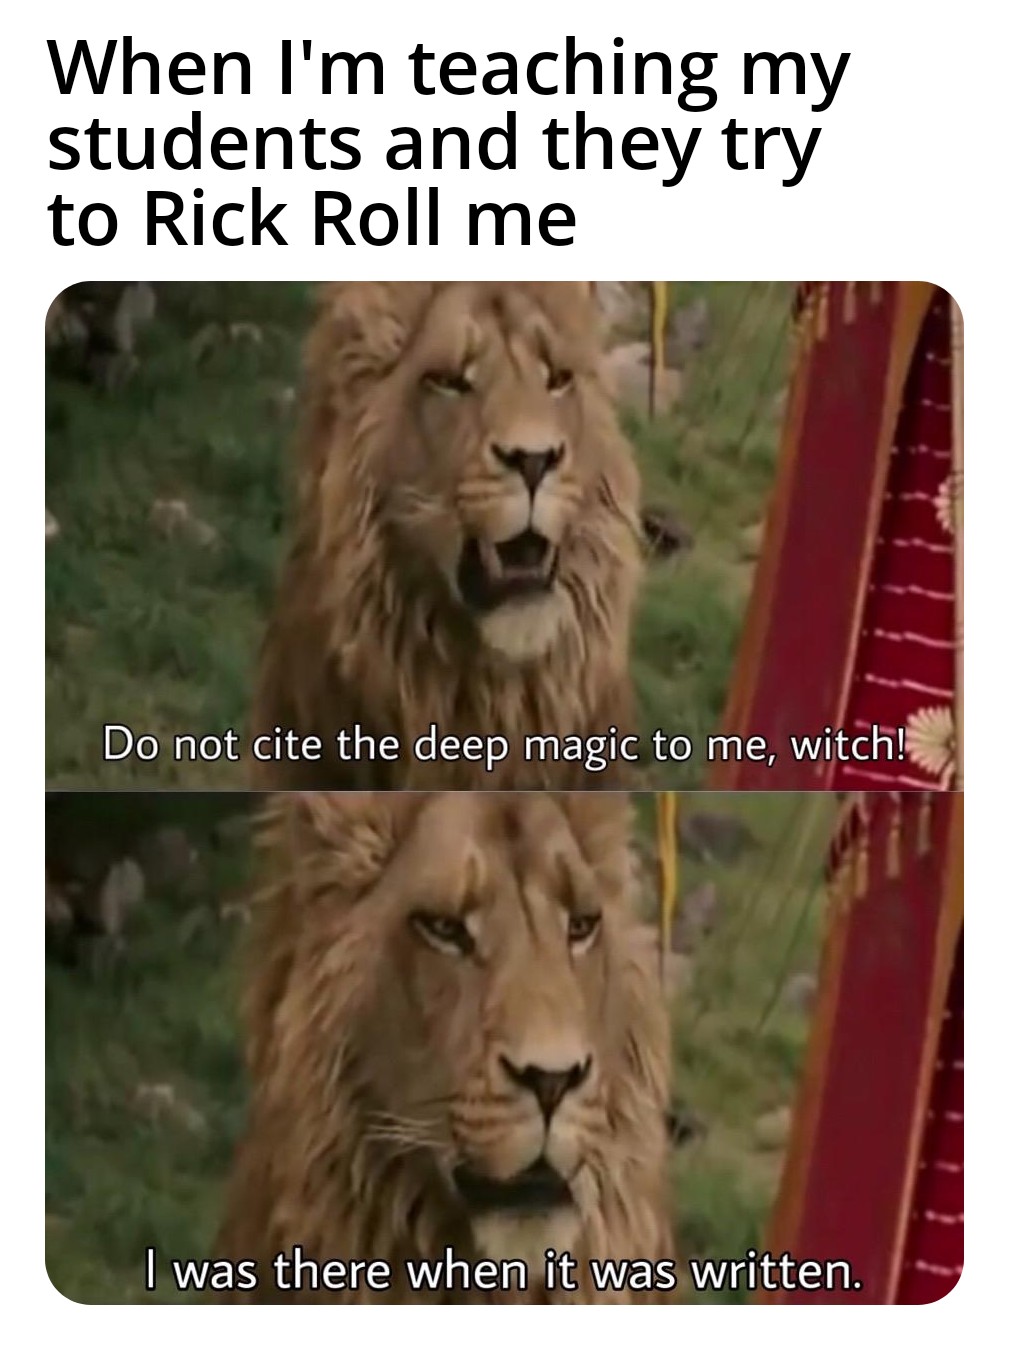 funny memes - bridgerton memes - When I'm teaching my students and they try to Rick Roll me Do not cite the deep magic to me, witch! I was there when it was written.